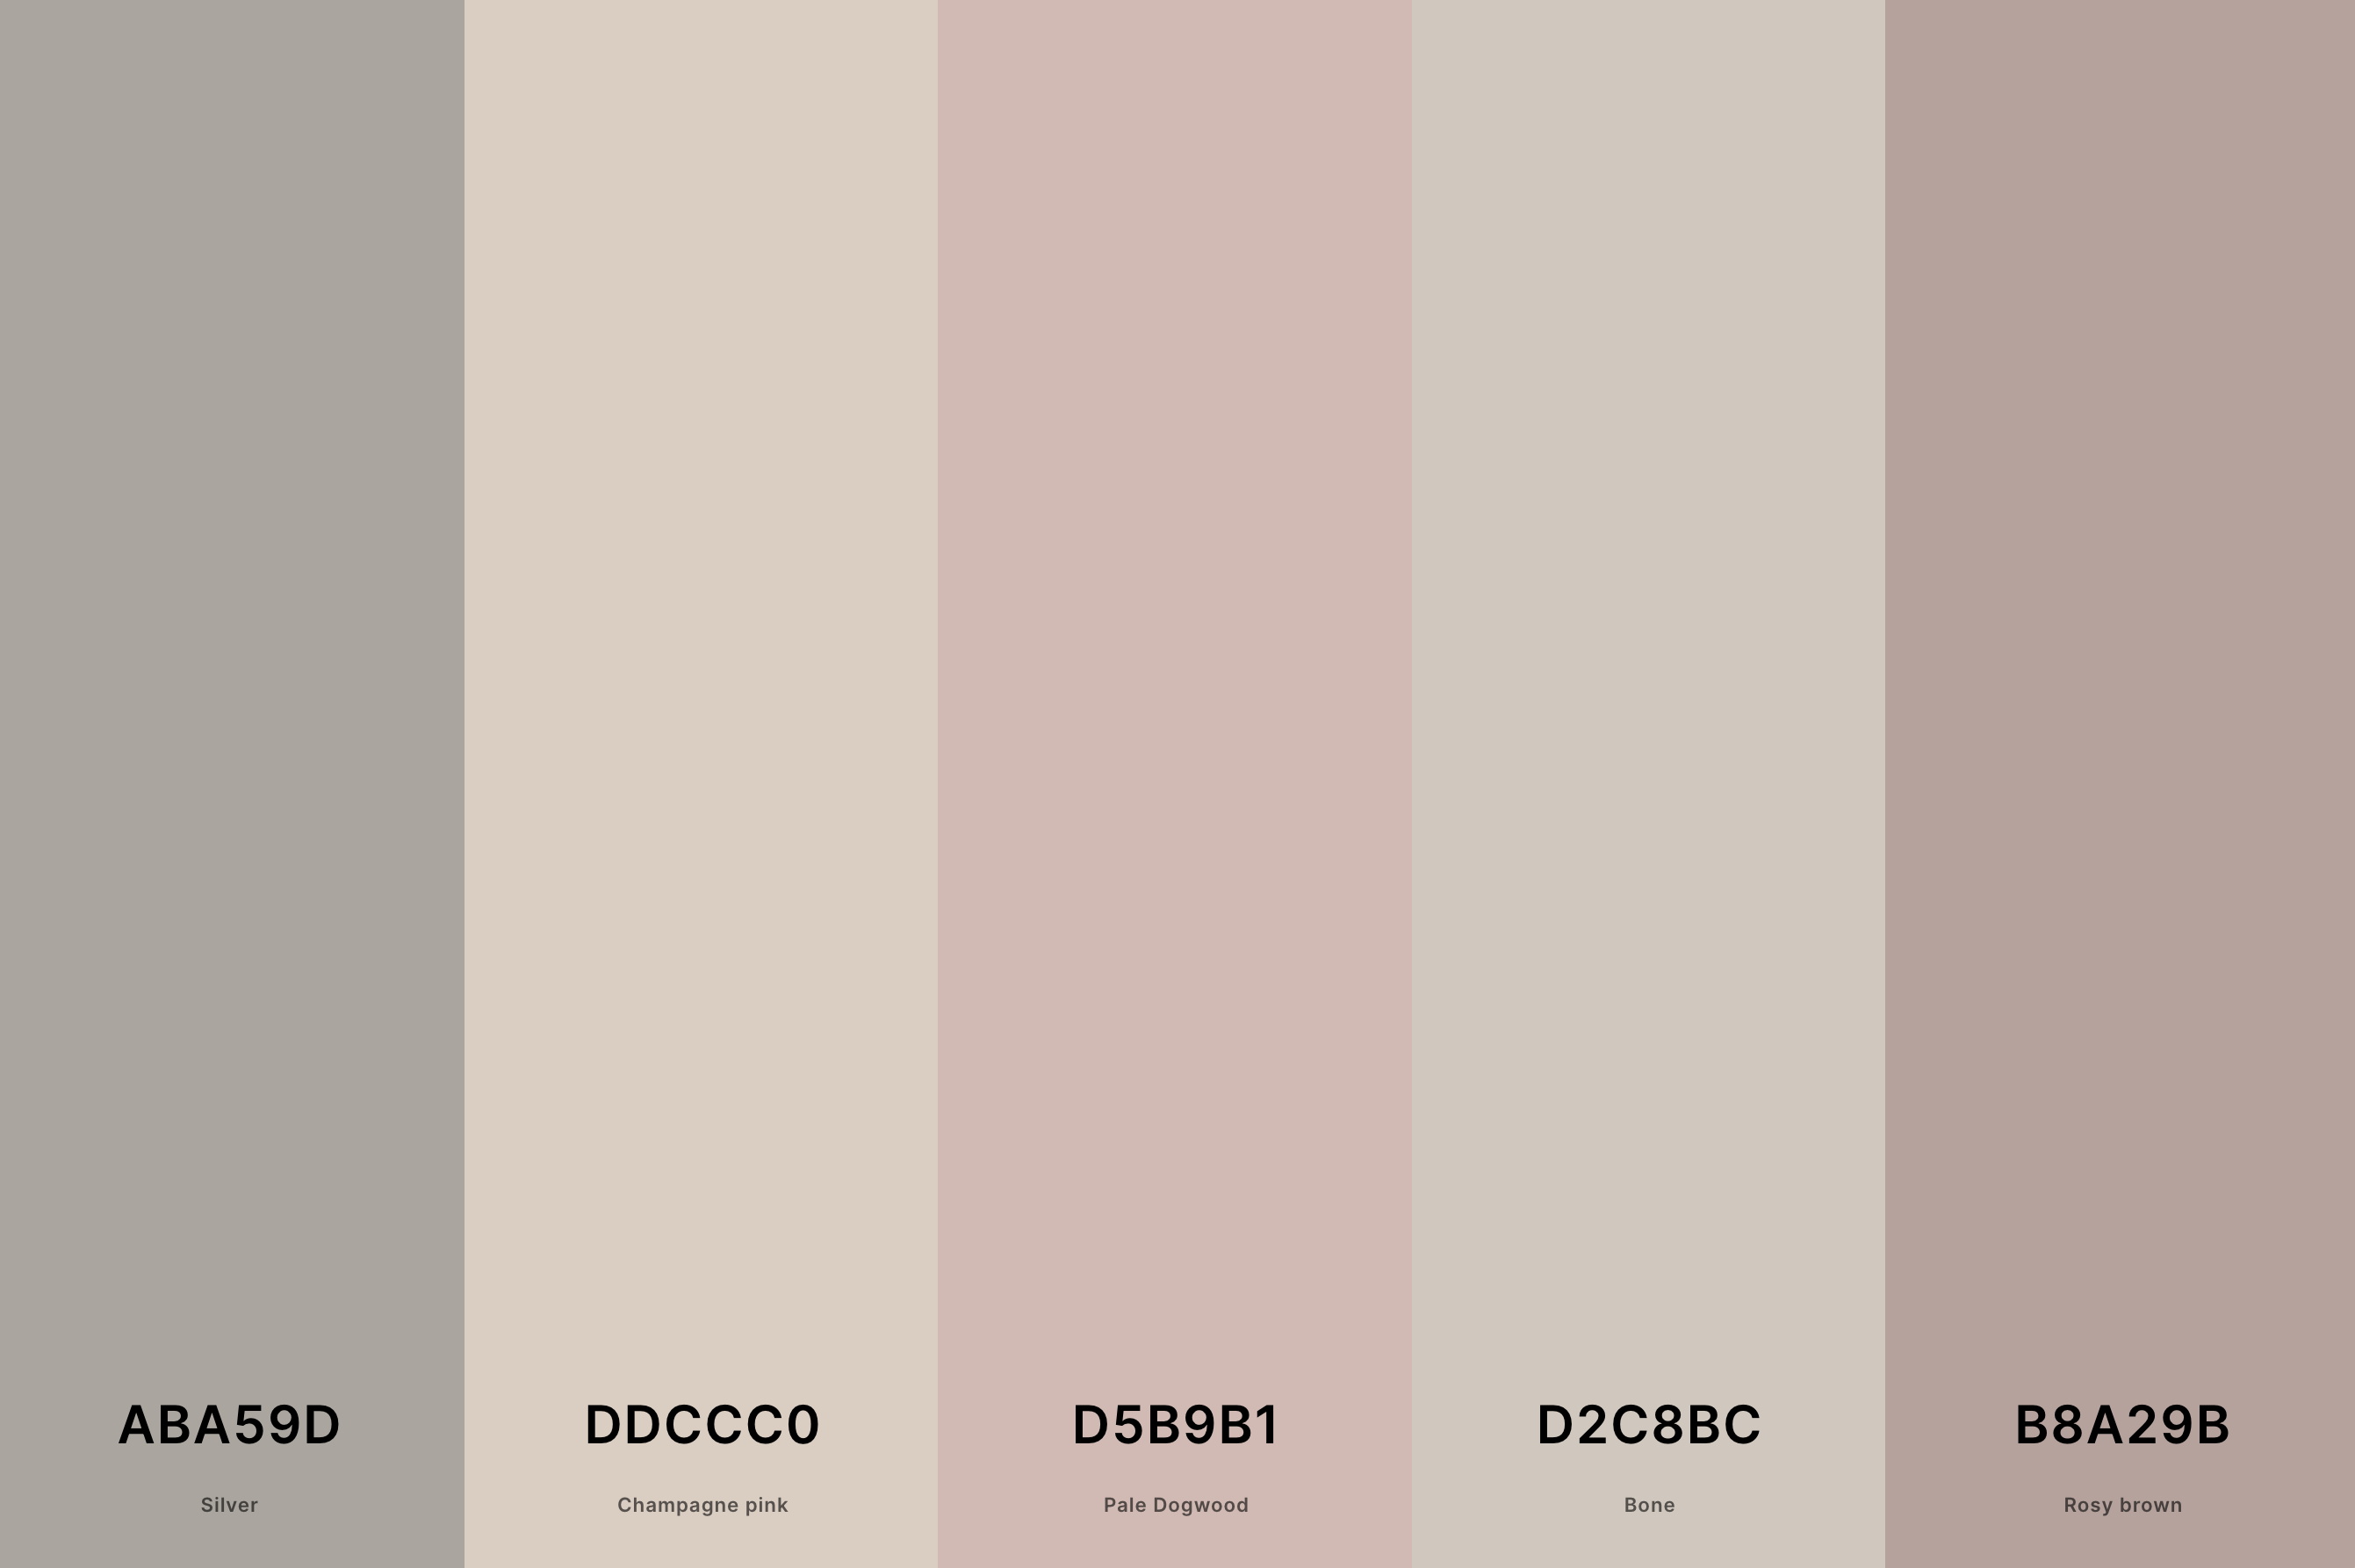 13. Neutral Tan Color Palette Color Palette with Silver (Hex #ABA59D) + Champagne Pink (Hex #DDCCC0) + Pale Dogwood (Hex #D5B9B1) + Bone (Hex #D2C8BC) + Rosy Brown (Hex #B8A29B) Color Palette with Hex Codes